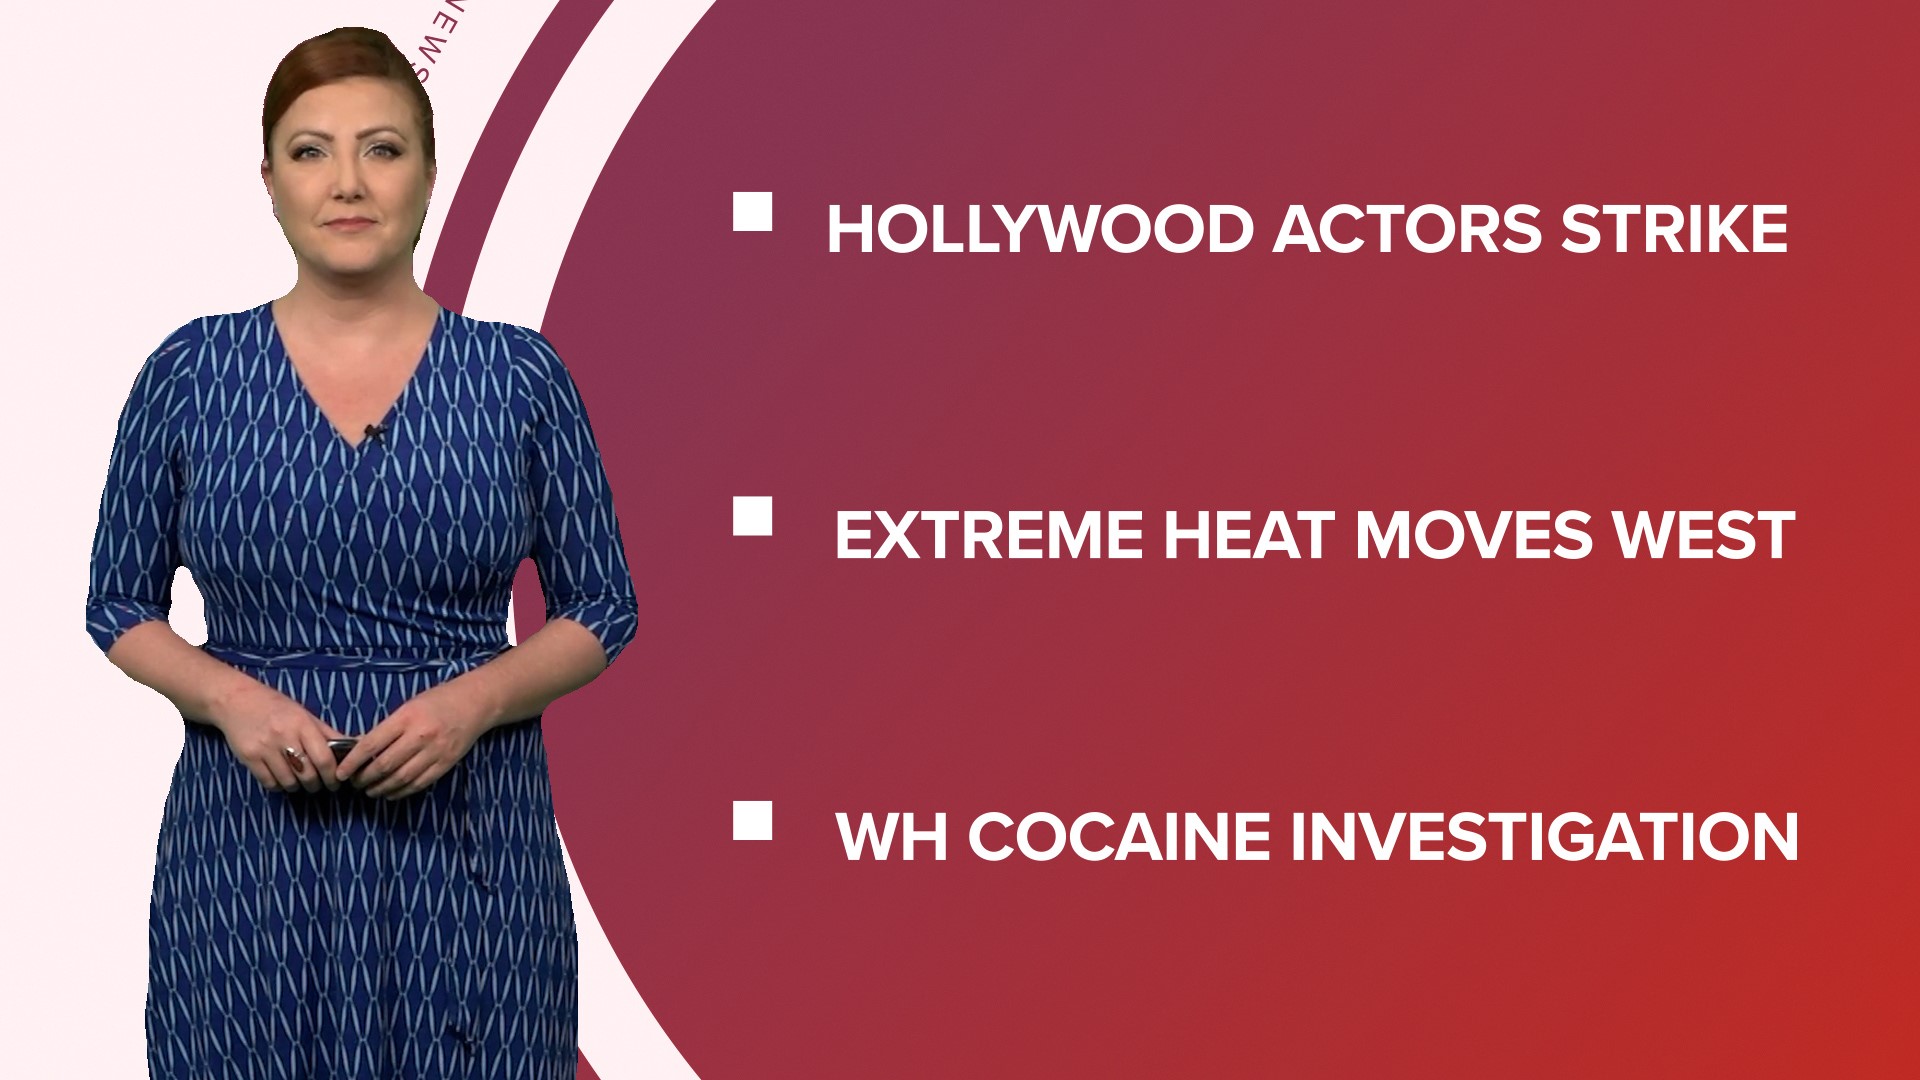 A look at what is happening in the news from Hollywood actors striking to extreme heat baking the nation and FDA approving over-the-counter birth control pill.